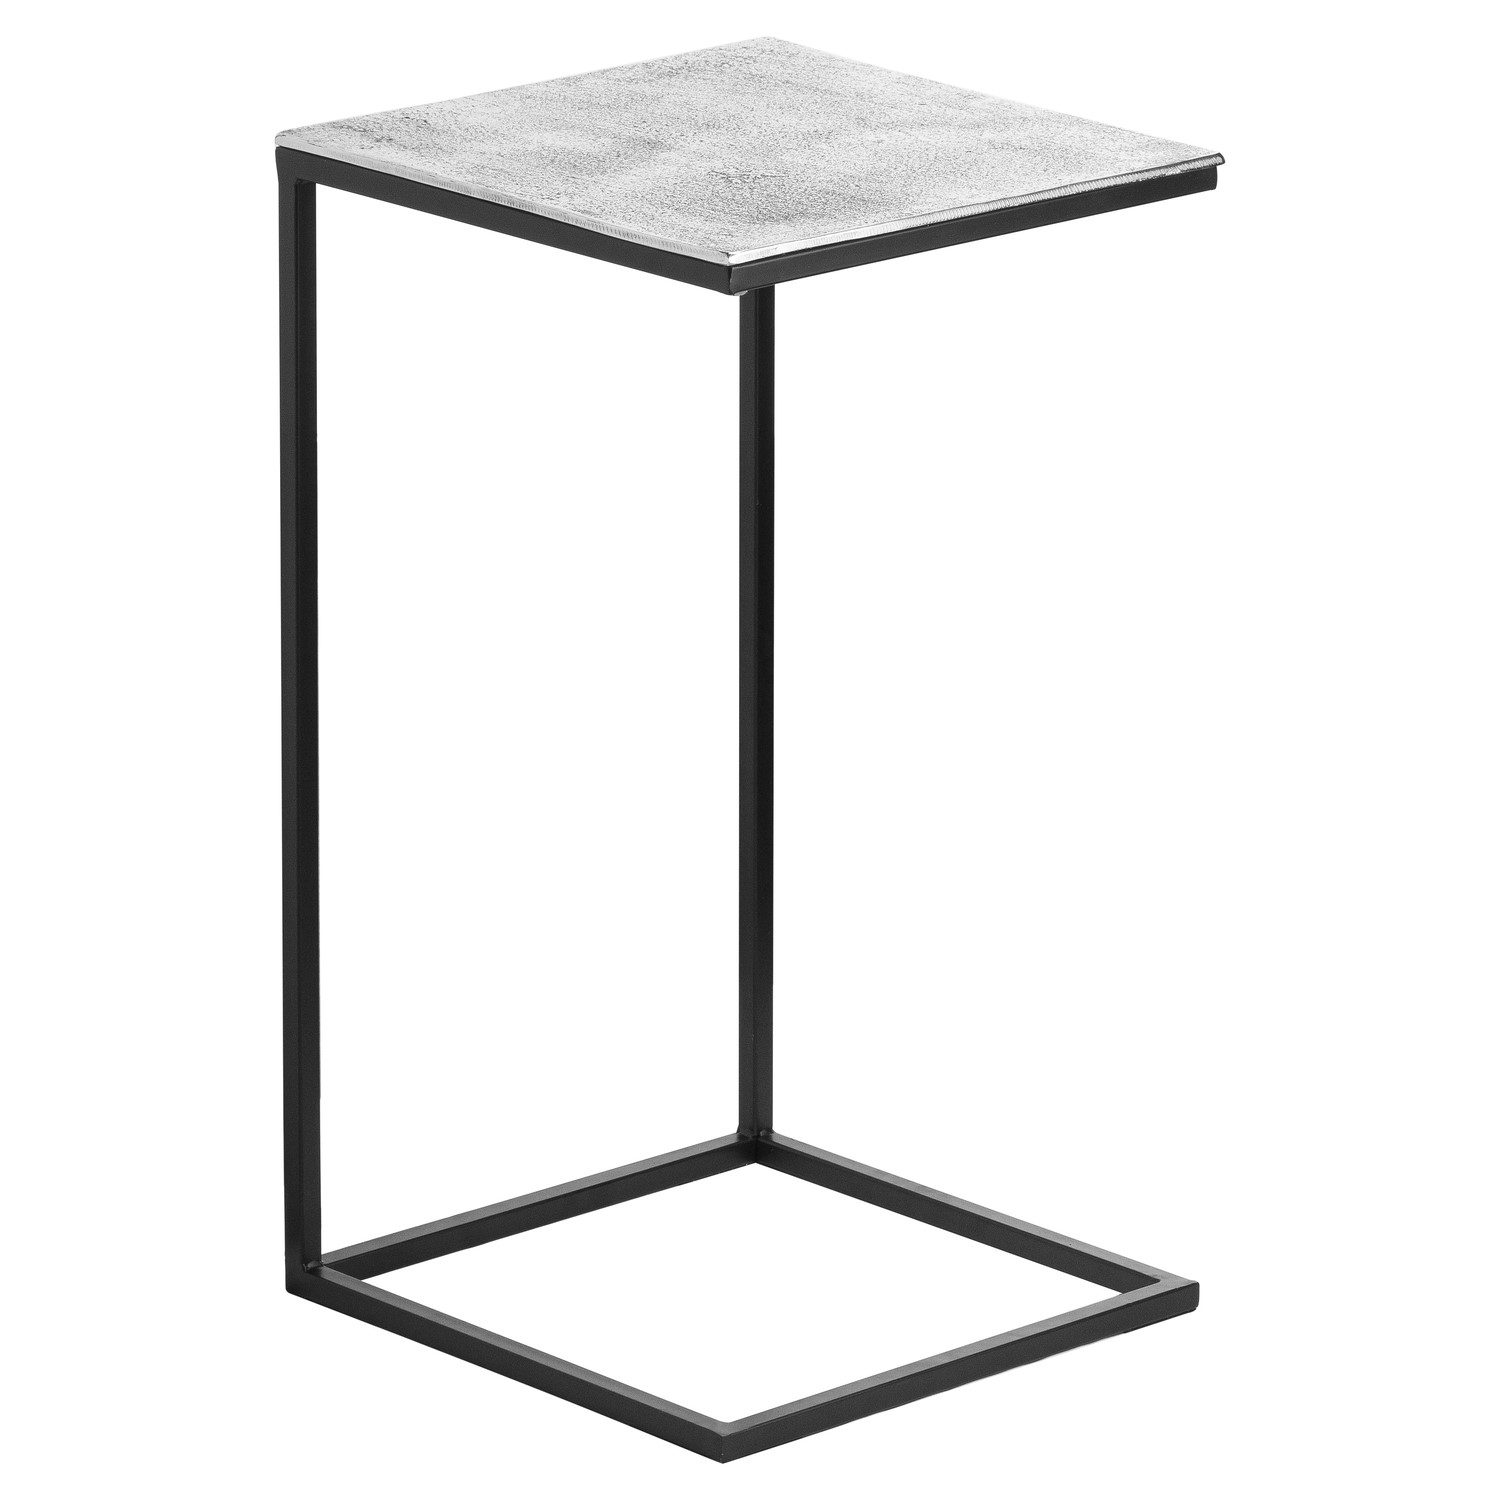 Read more about Set of 2 silver side tables